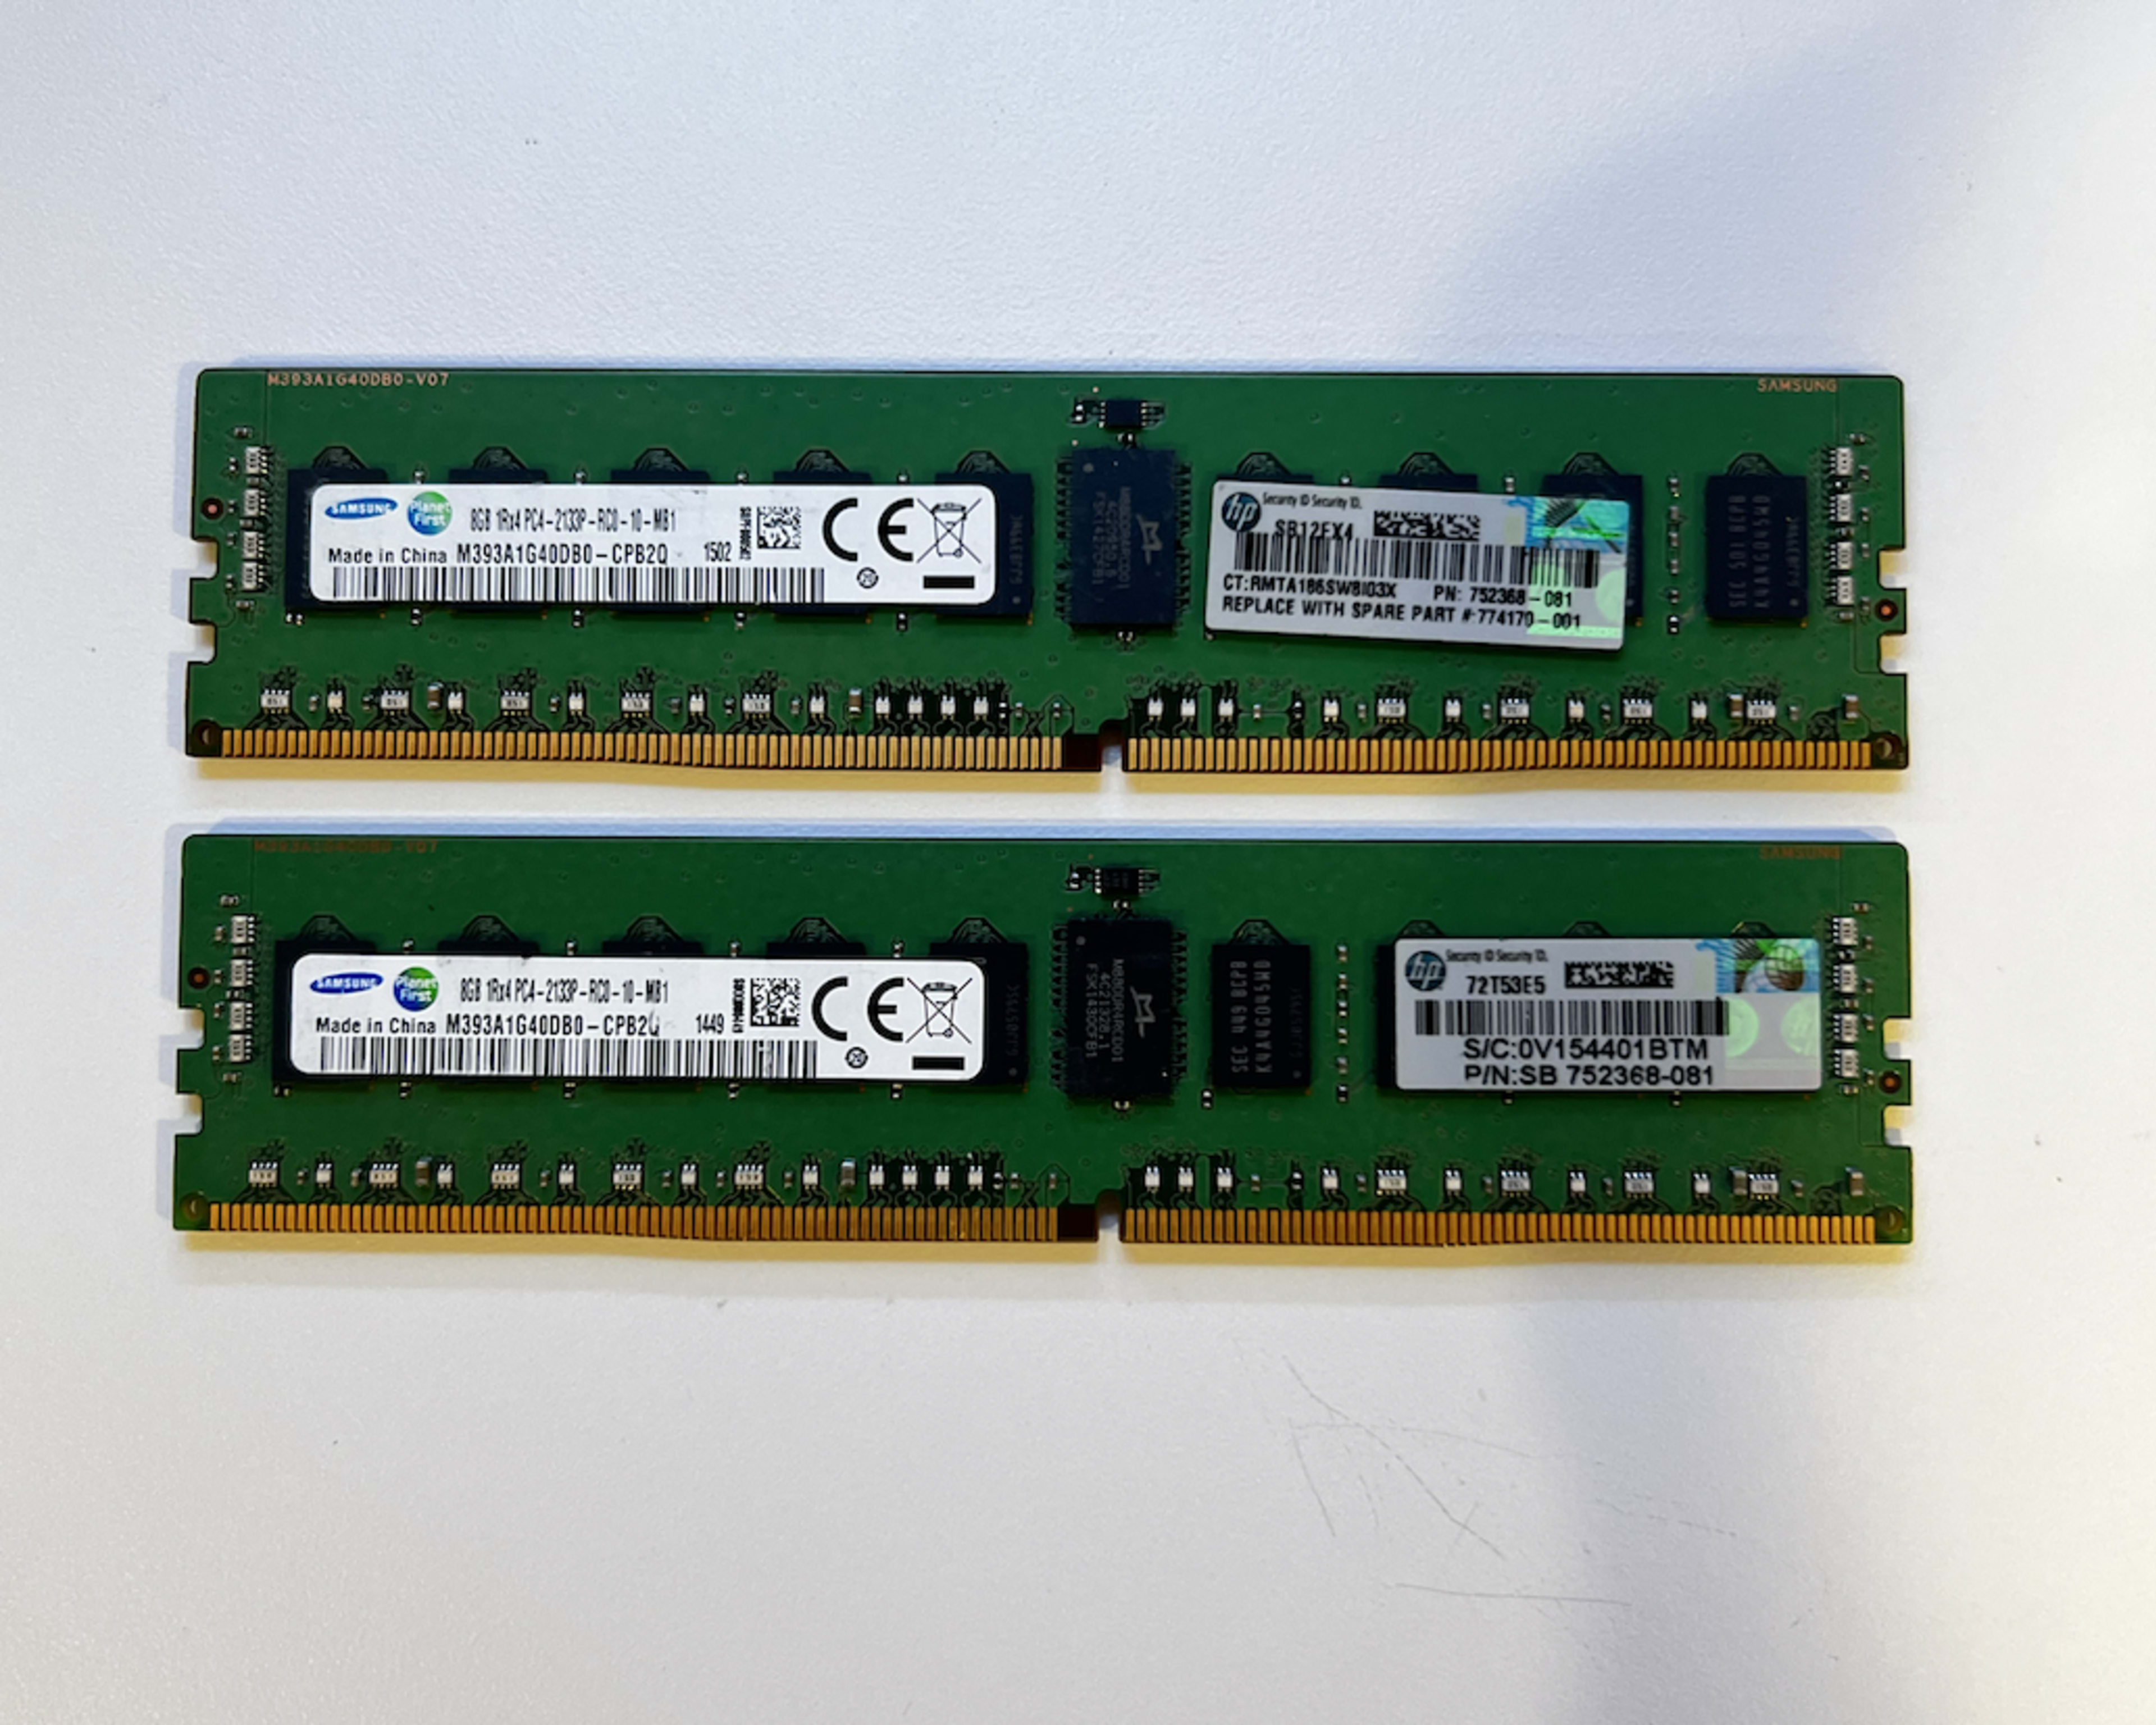 Samsung DDR4 16GB (2x8) 2133MHz ECC Memory [came from an HP system]